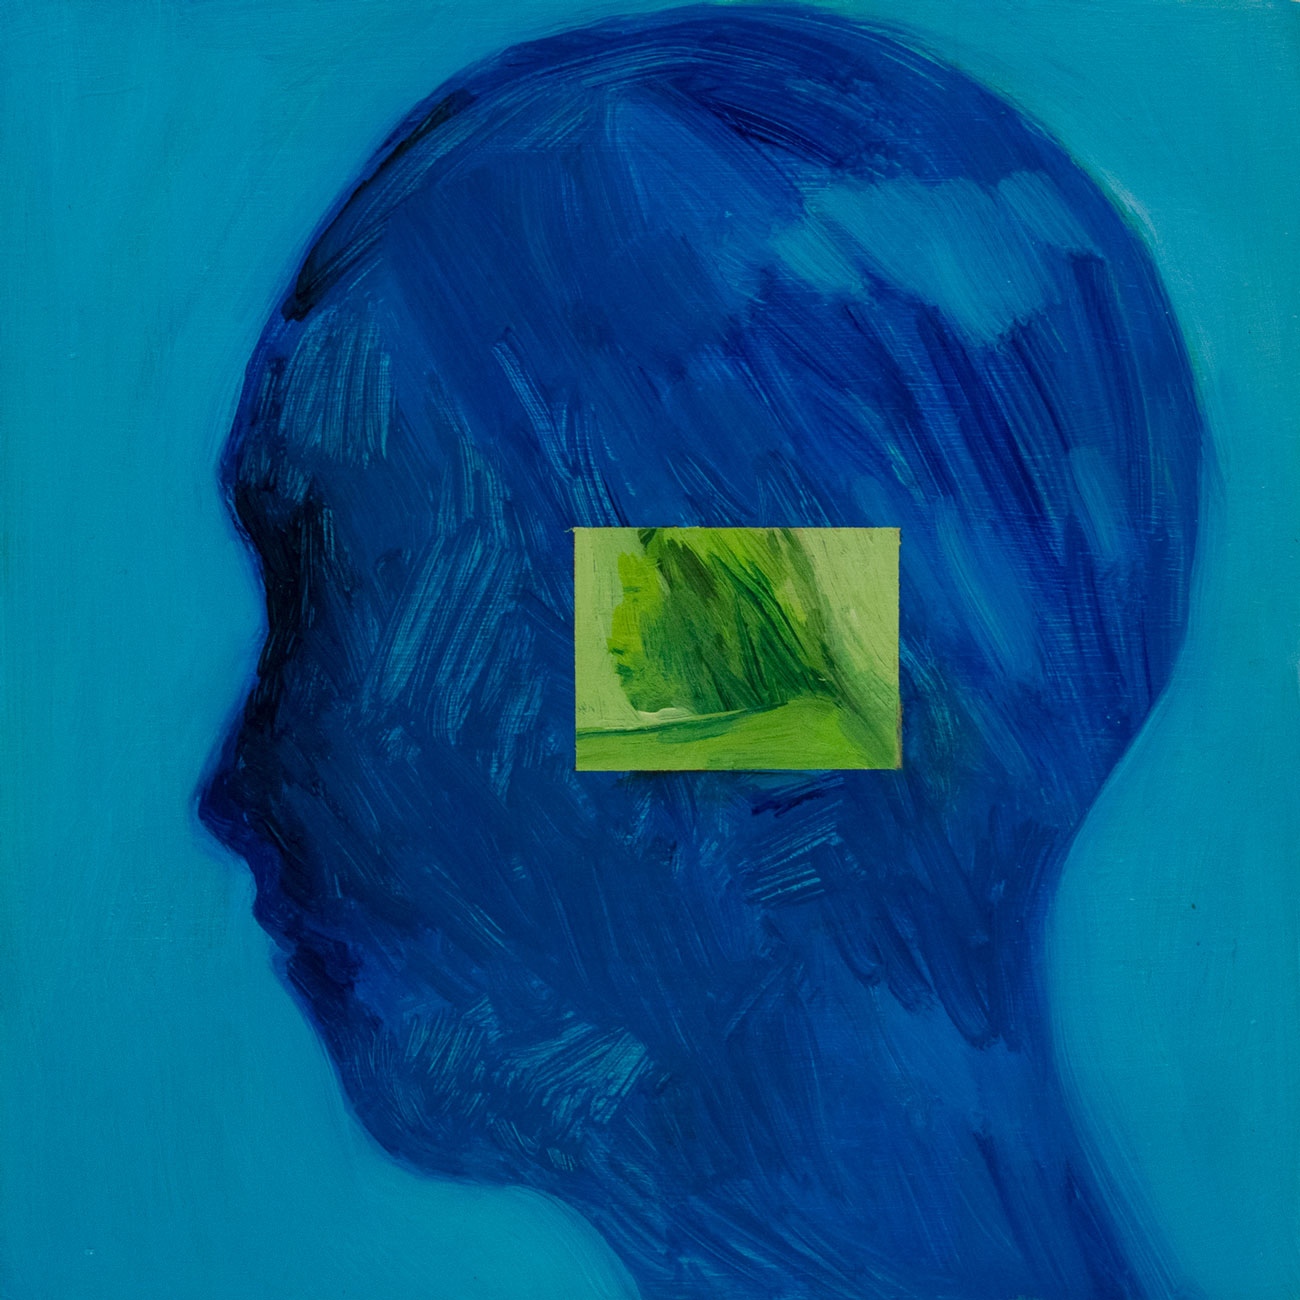 portrait view of a person's face in blue with a smaller frame showing a woman looking into someplace in the distance